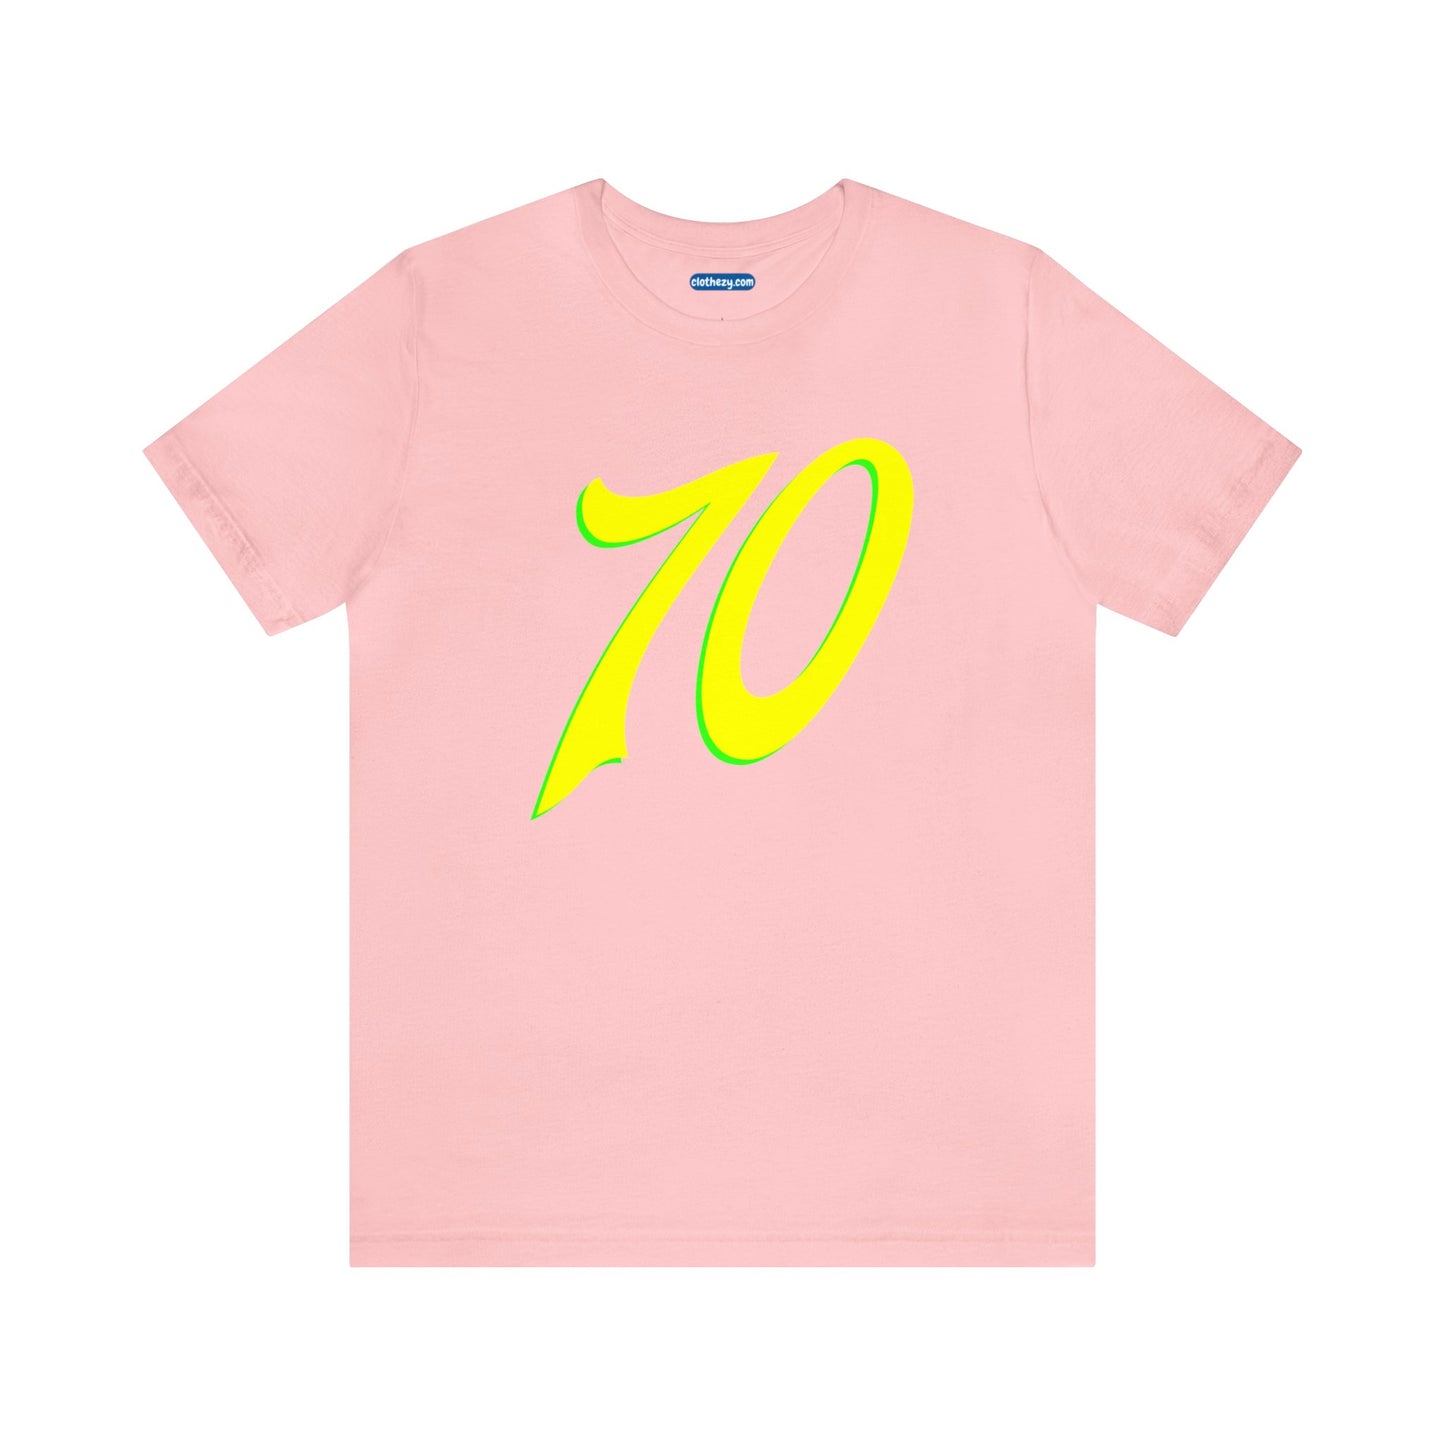 Number 70 Design - Soft Cotton Tee for birthdays and celebrations, Gift for friends and family, Multiple Options by clothezy.com in Red Size Small - Buy Now